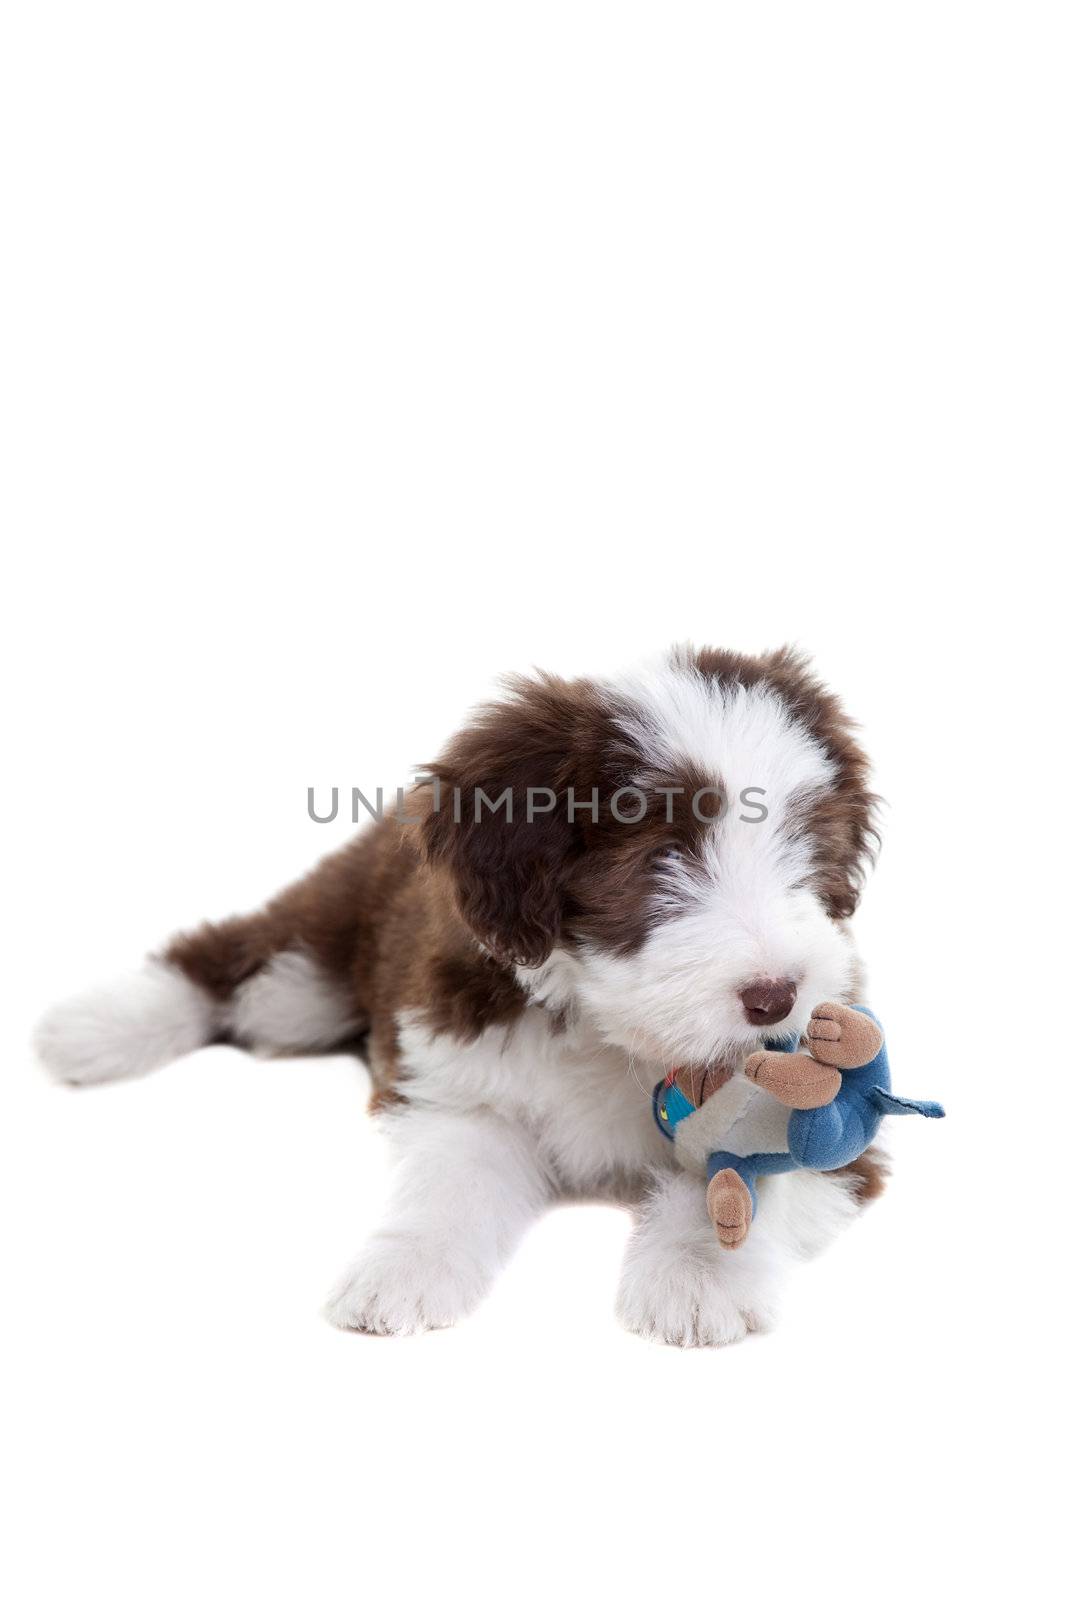 Puppy bearded collie by Fotosmurf